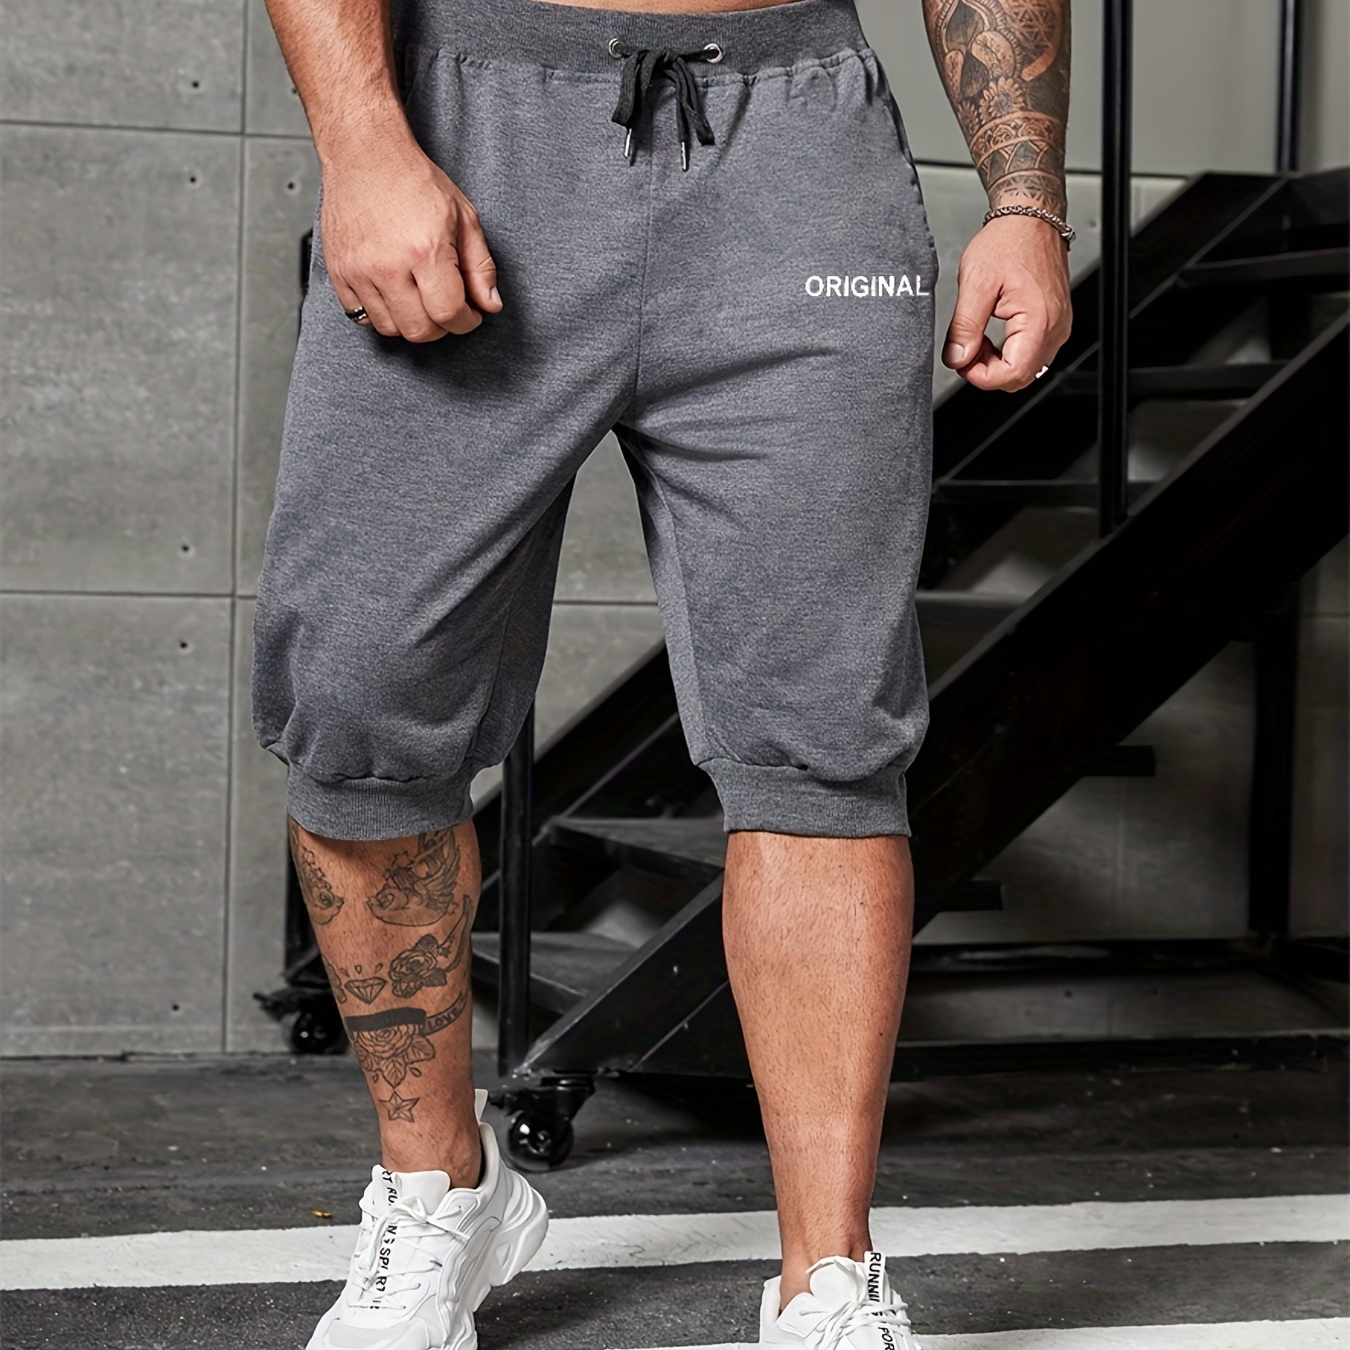 

Plus Size Men's Streetwear Shorts, Color Block "original" Graphic Drawstring Stretchy Short Pants For Workout, Summer Clothings Men's Outfits